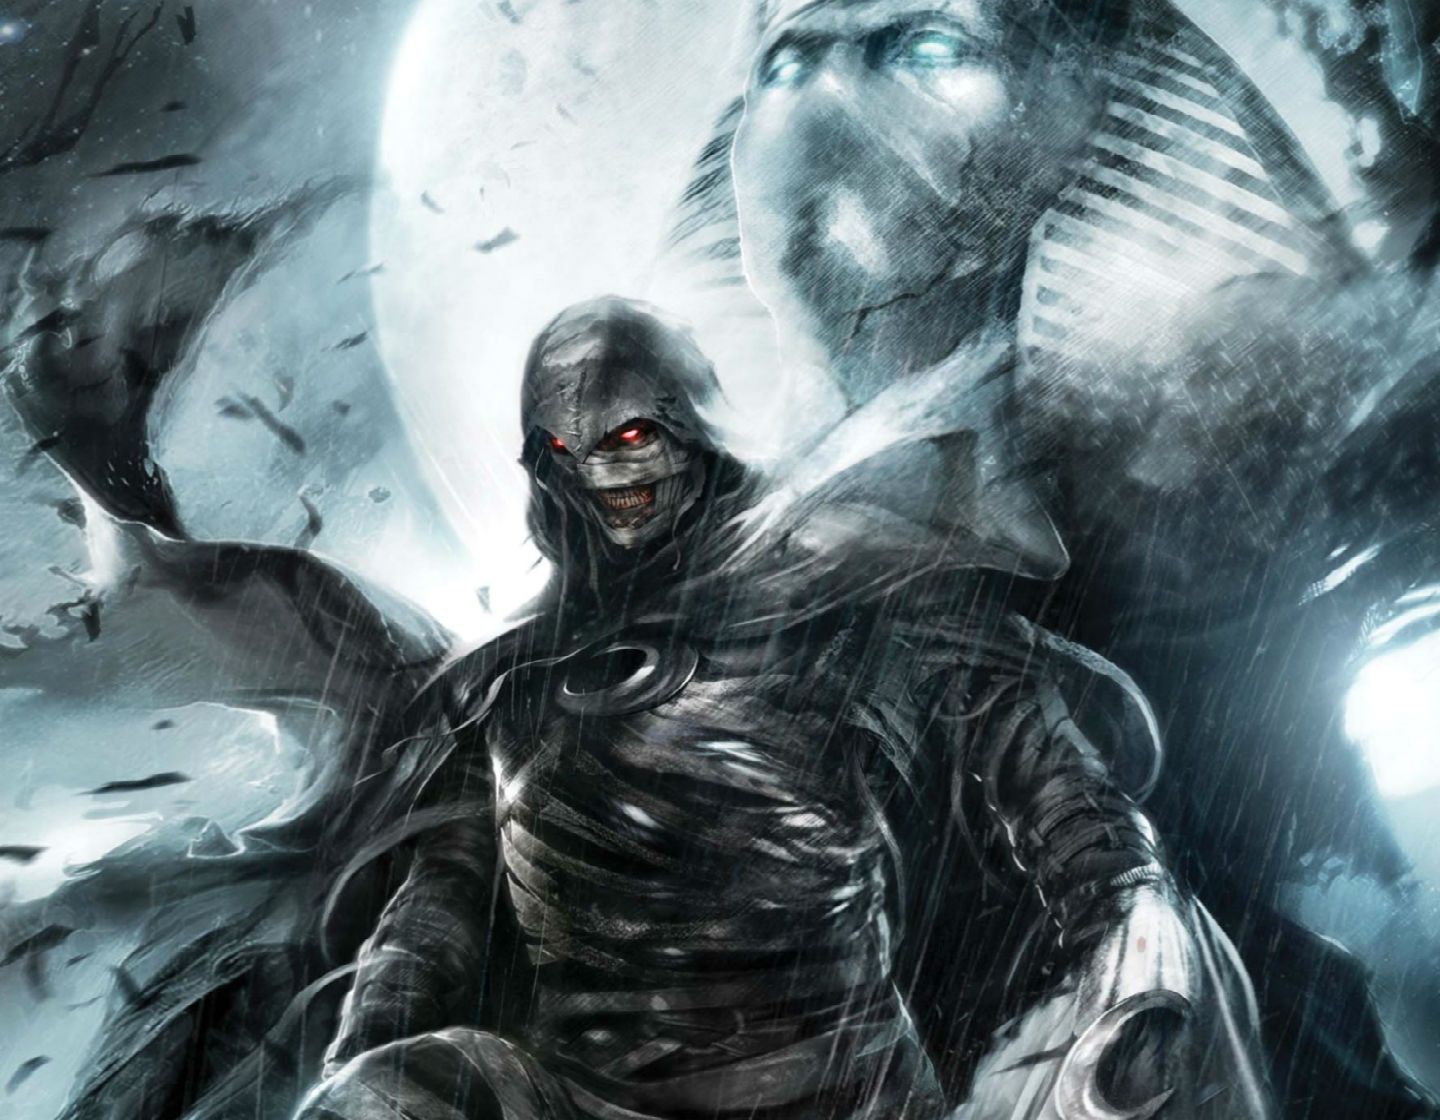 Top Moon Knight Wallpaper Images for Pinterest